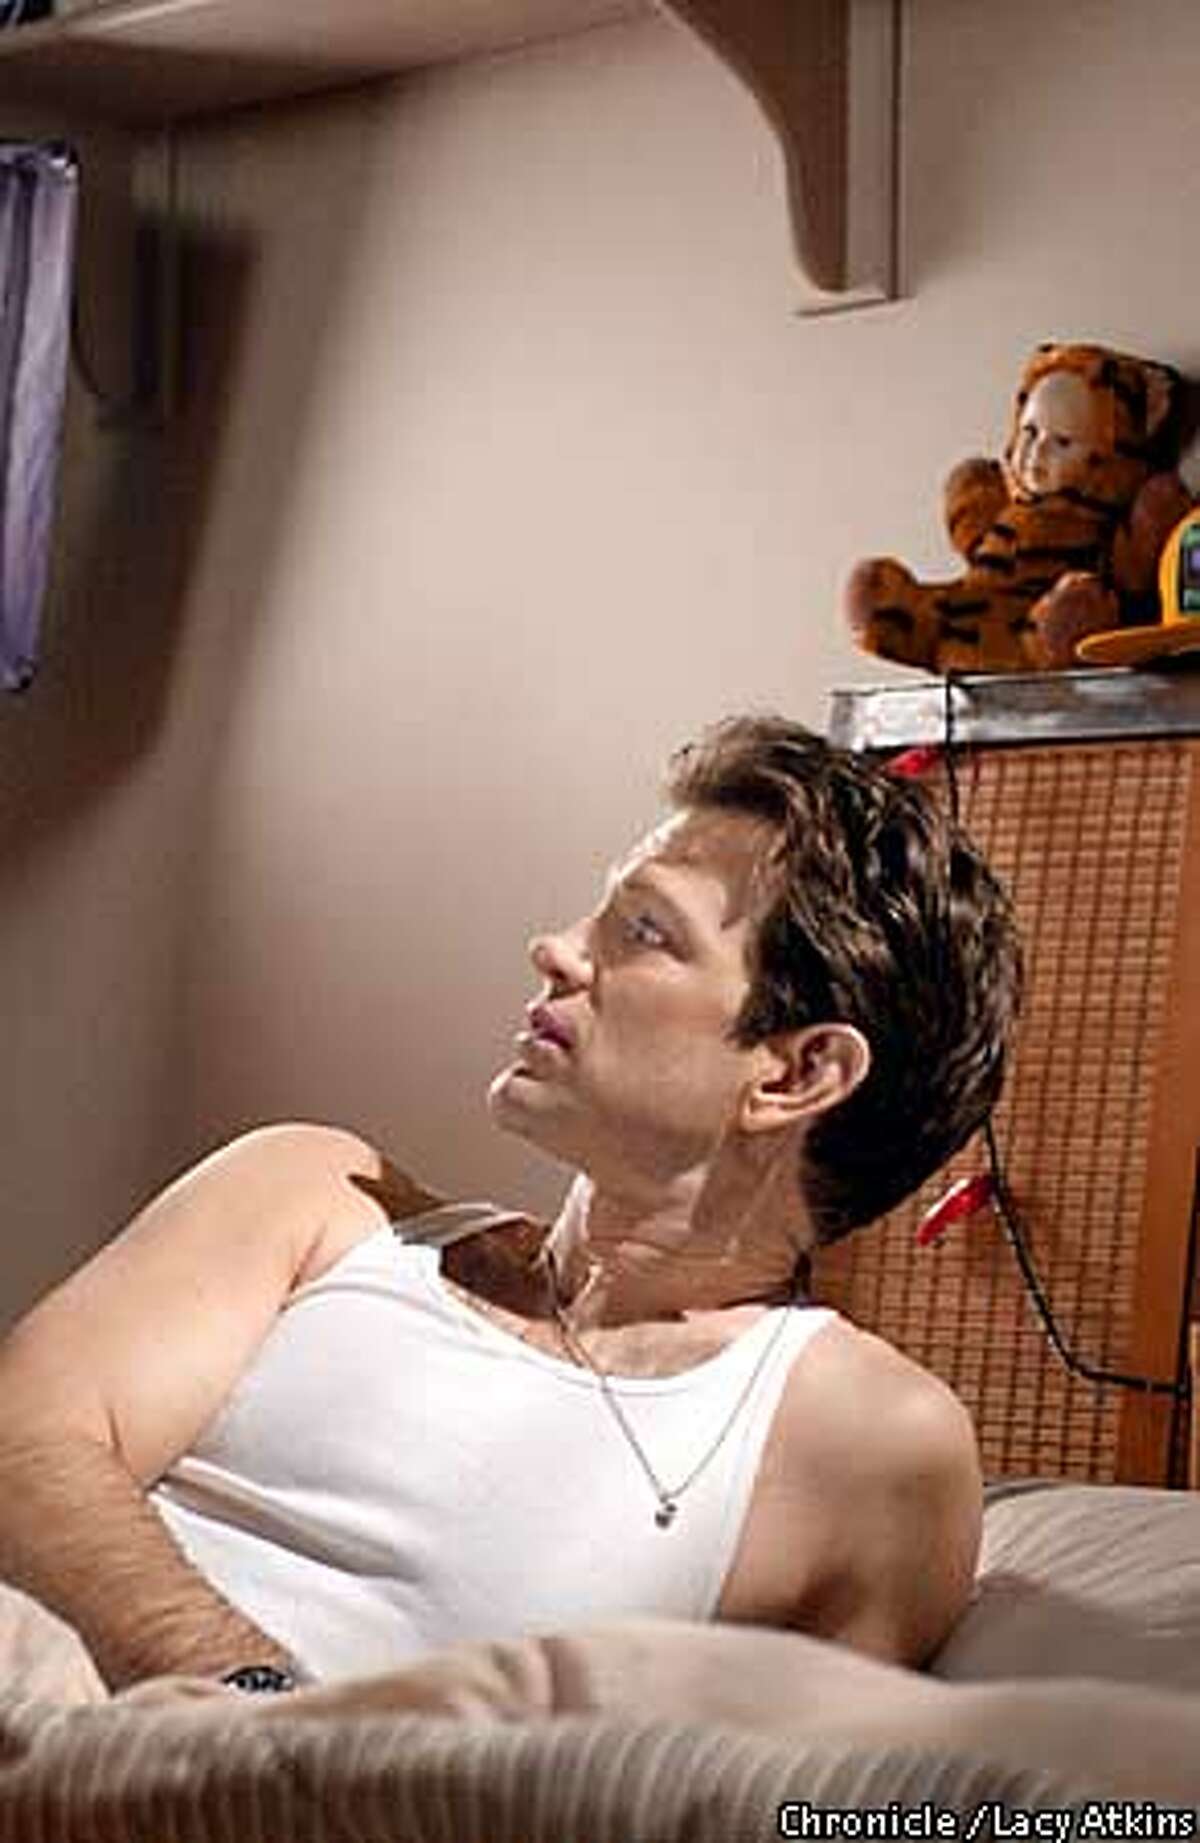 ISAAK3-C-7FEB01-DD-LA Chris Isaak in his bedroom on the set of "The Chris Isaak Show" in Vancouver. Photo By Lacy Atkins/San Francisco Chronicle